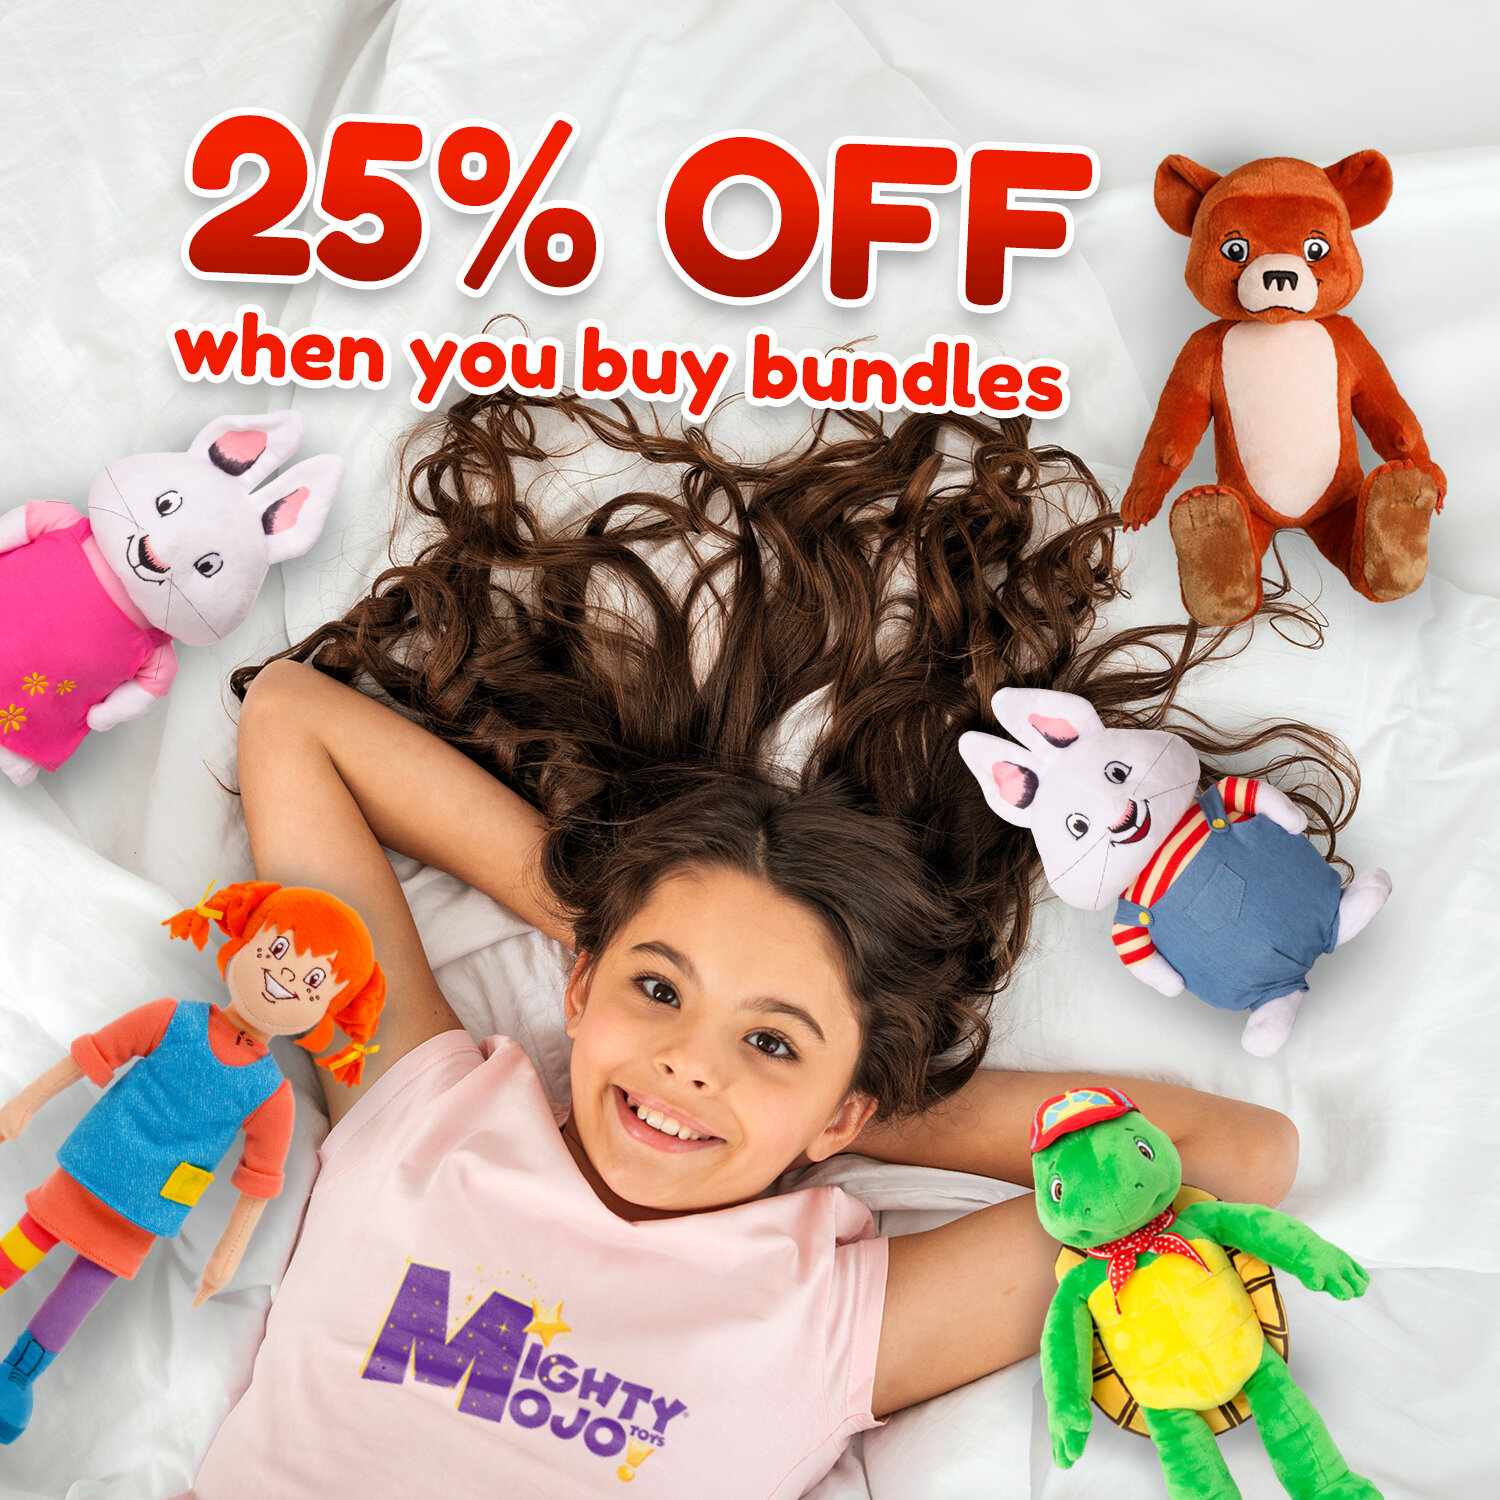 Save 25% with a our Best Selling Plush Bundle! Includes Max and Ruby, Pippi Longstocking, Little Bear and Franklin The Turtle together. Hurry, expires November 28. Promo Code: NELVANA25 

#mightymojotoys #blackfriday #blackfriday2022 #blackfridaydeal